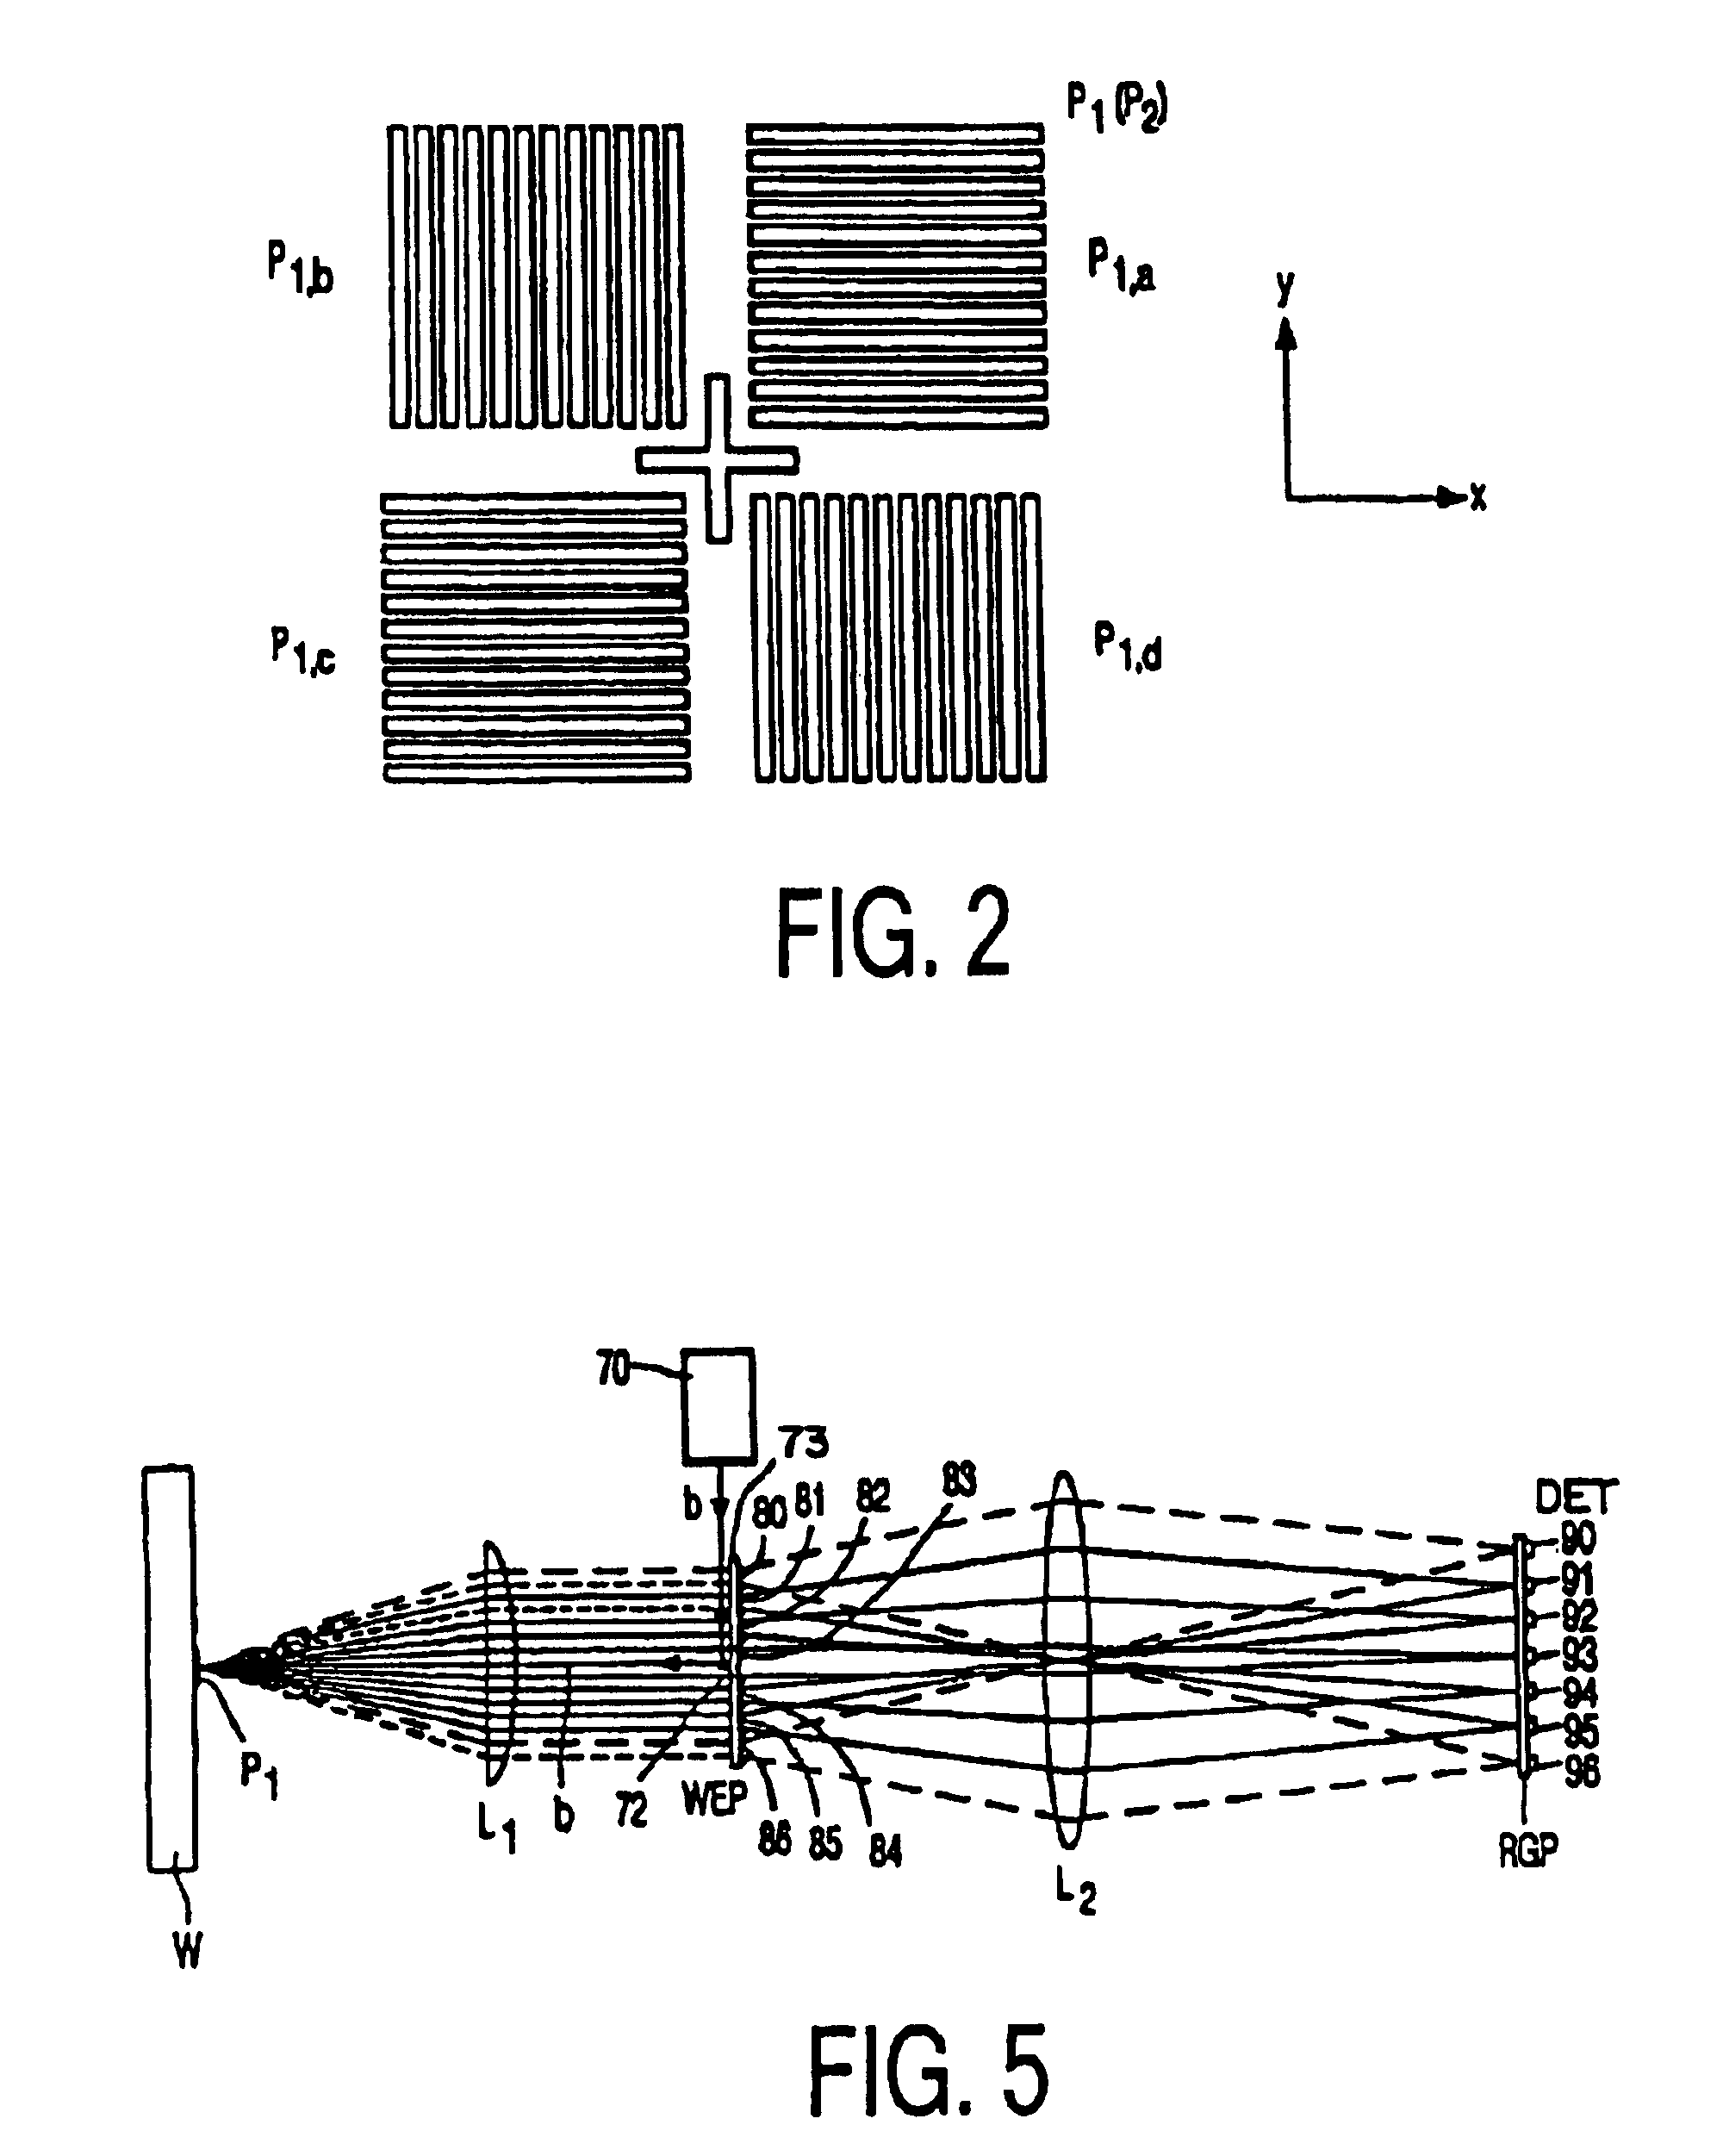 Alignment system and methods for lithographic systems using at least two wavelengths